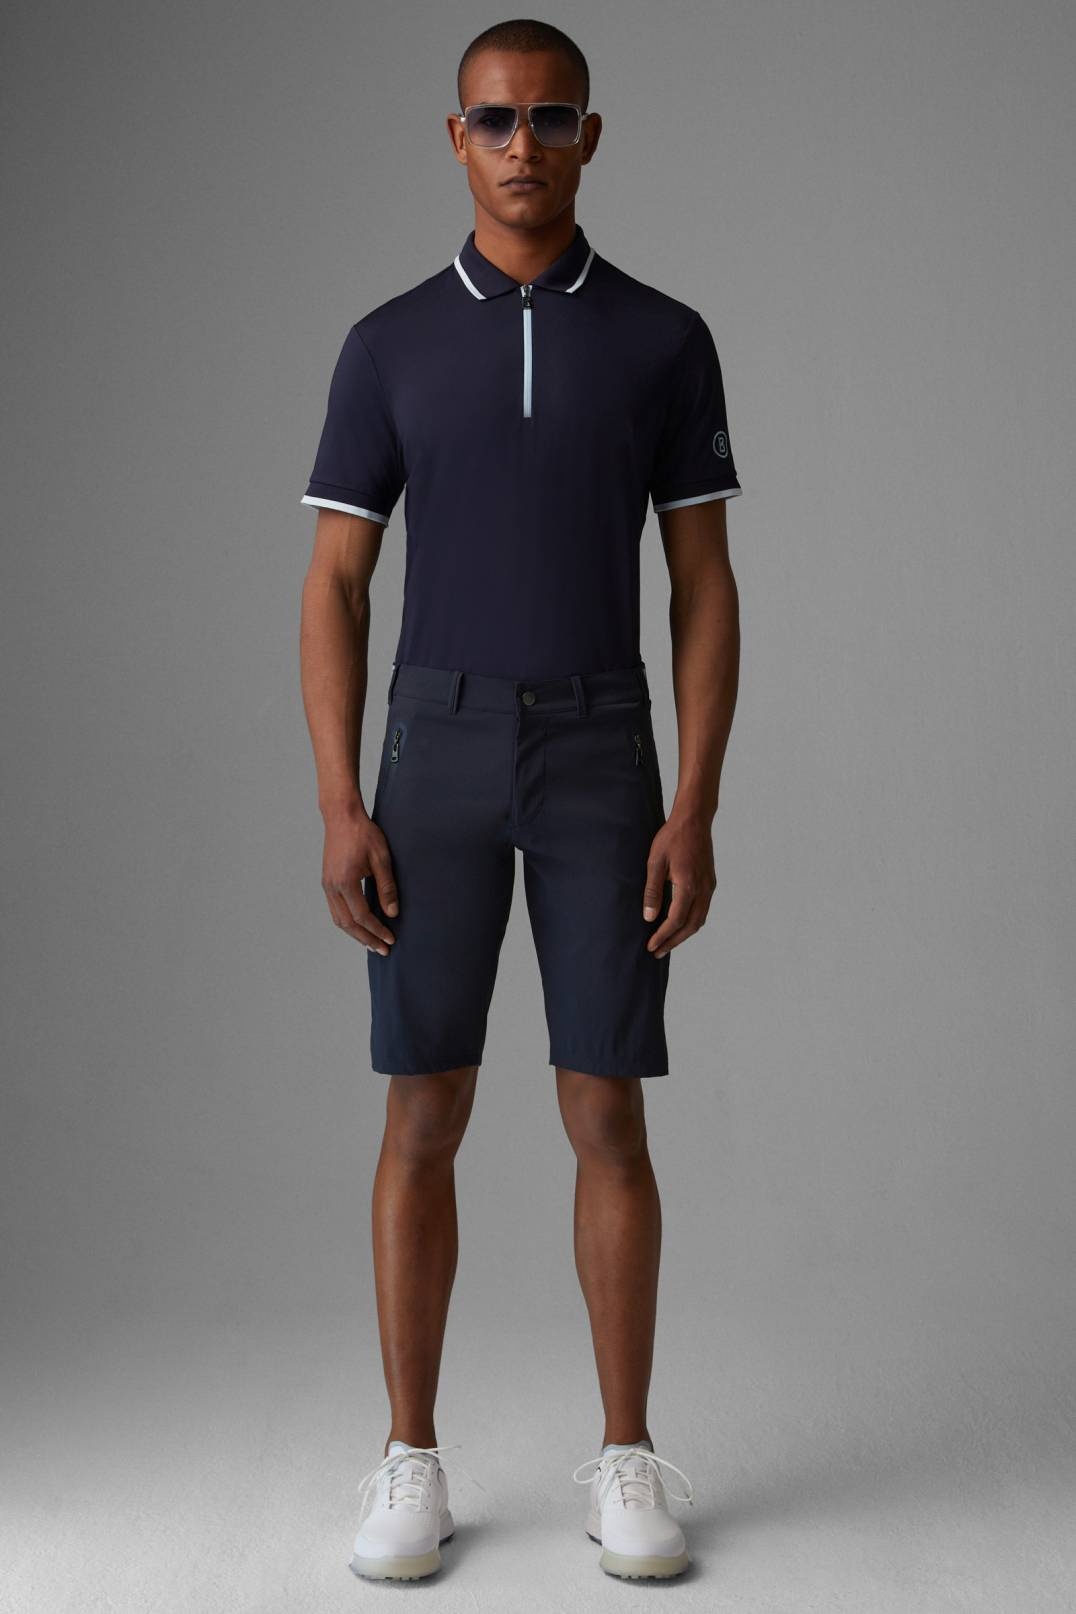 COLVIN FUNCTIONAL SHORTS IN NAVY BLUE - 4